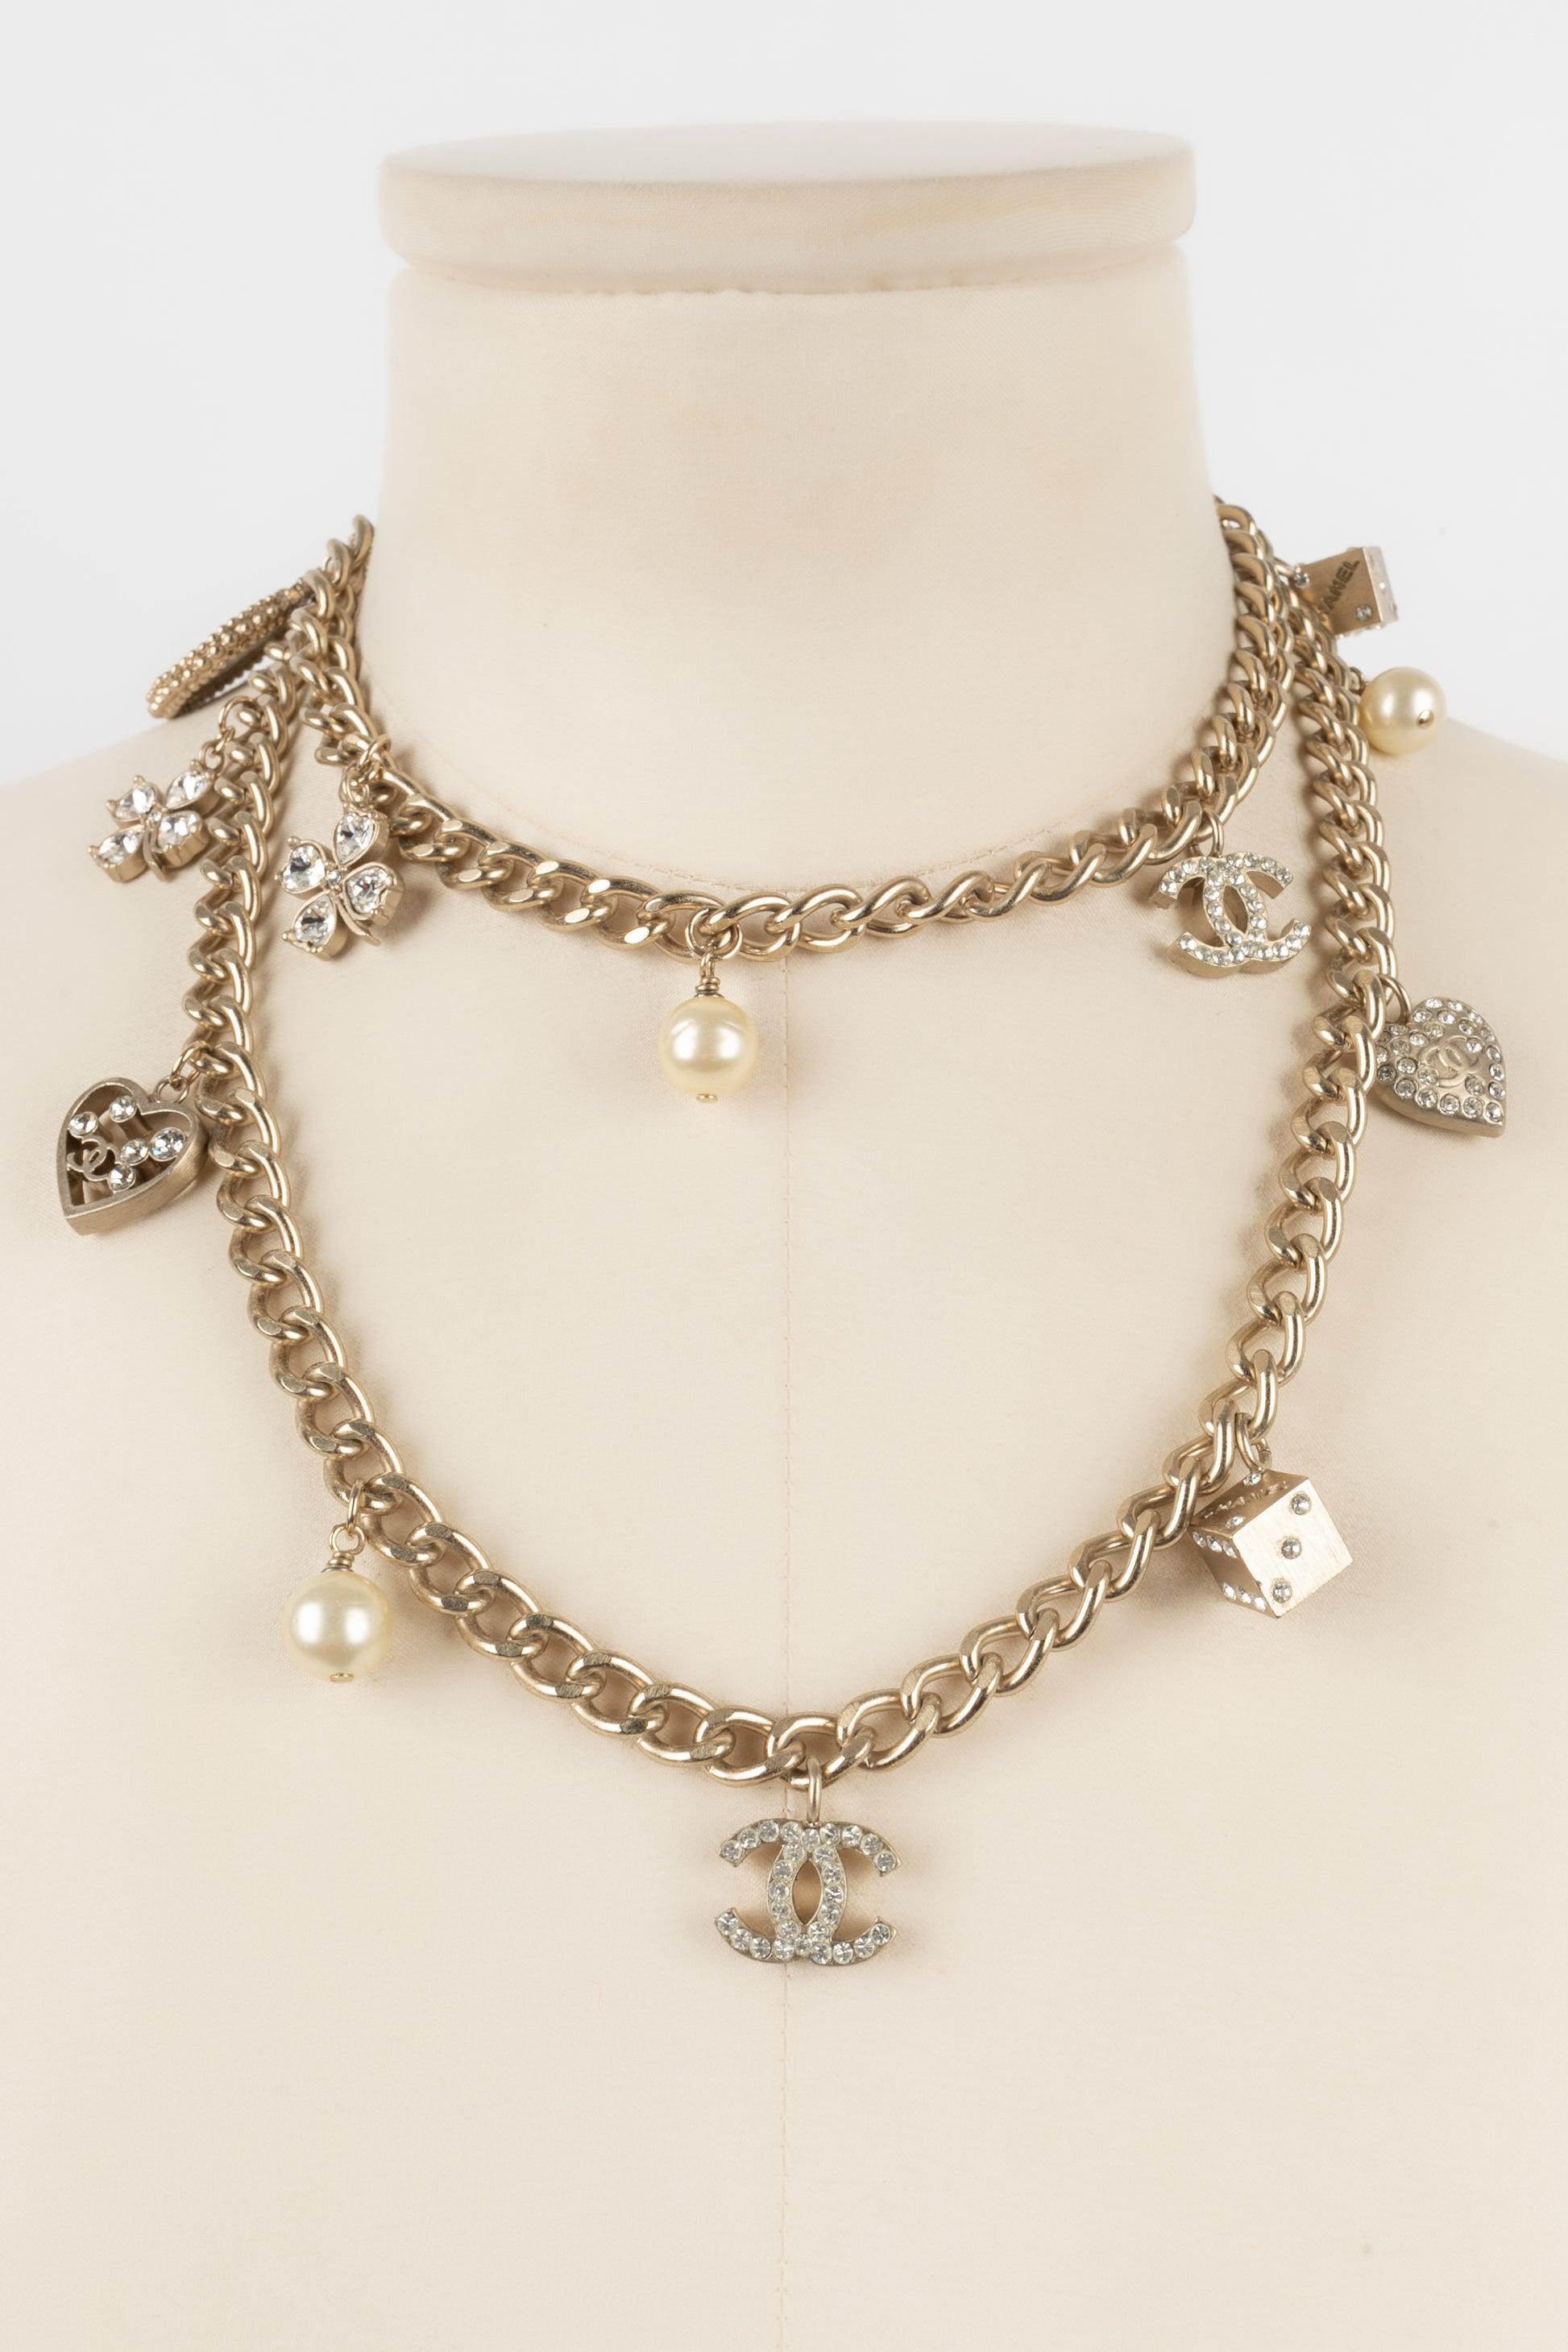 Chanel Silvery Metal Necklace Ornamented with Charms and Rhinestones, Fall 2005 For Sale 1